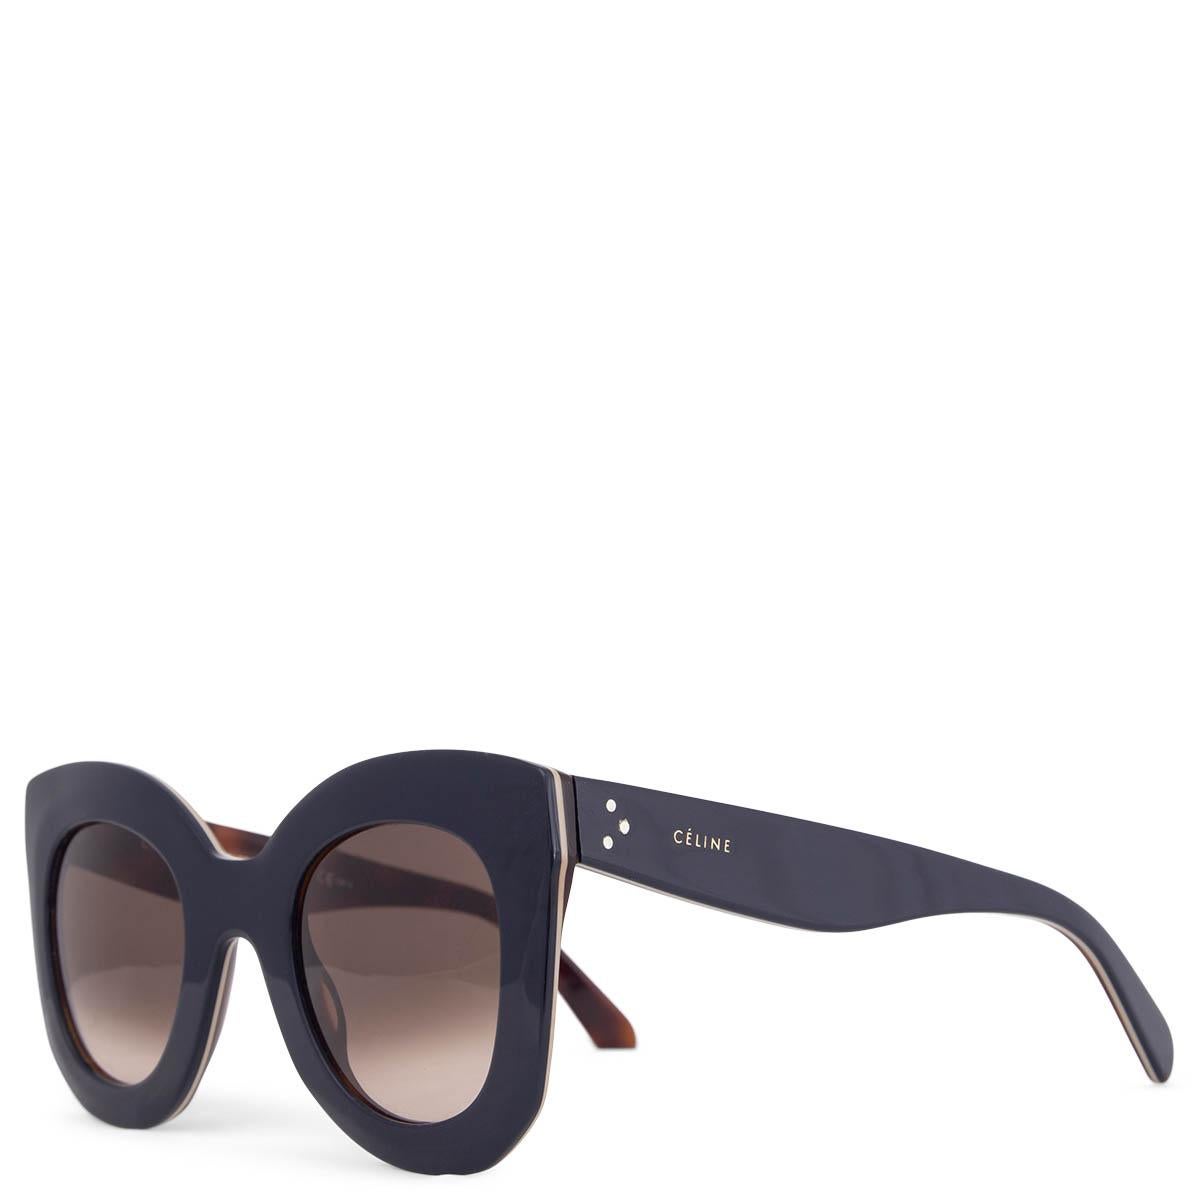 100% authentic Céline Marta sunglasses in navy and brown tortoiseshell acetate with brown gradient lenses. Have been worn and are in excellent condition. Come with soft case. 

Measurements
Model	CL 41093/S
Width	14cm (5.5in)
Height	6cm (2.3in)

All